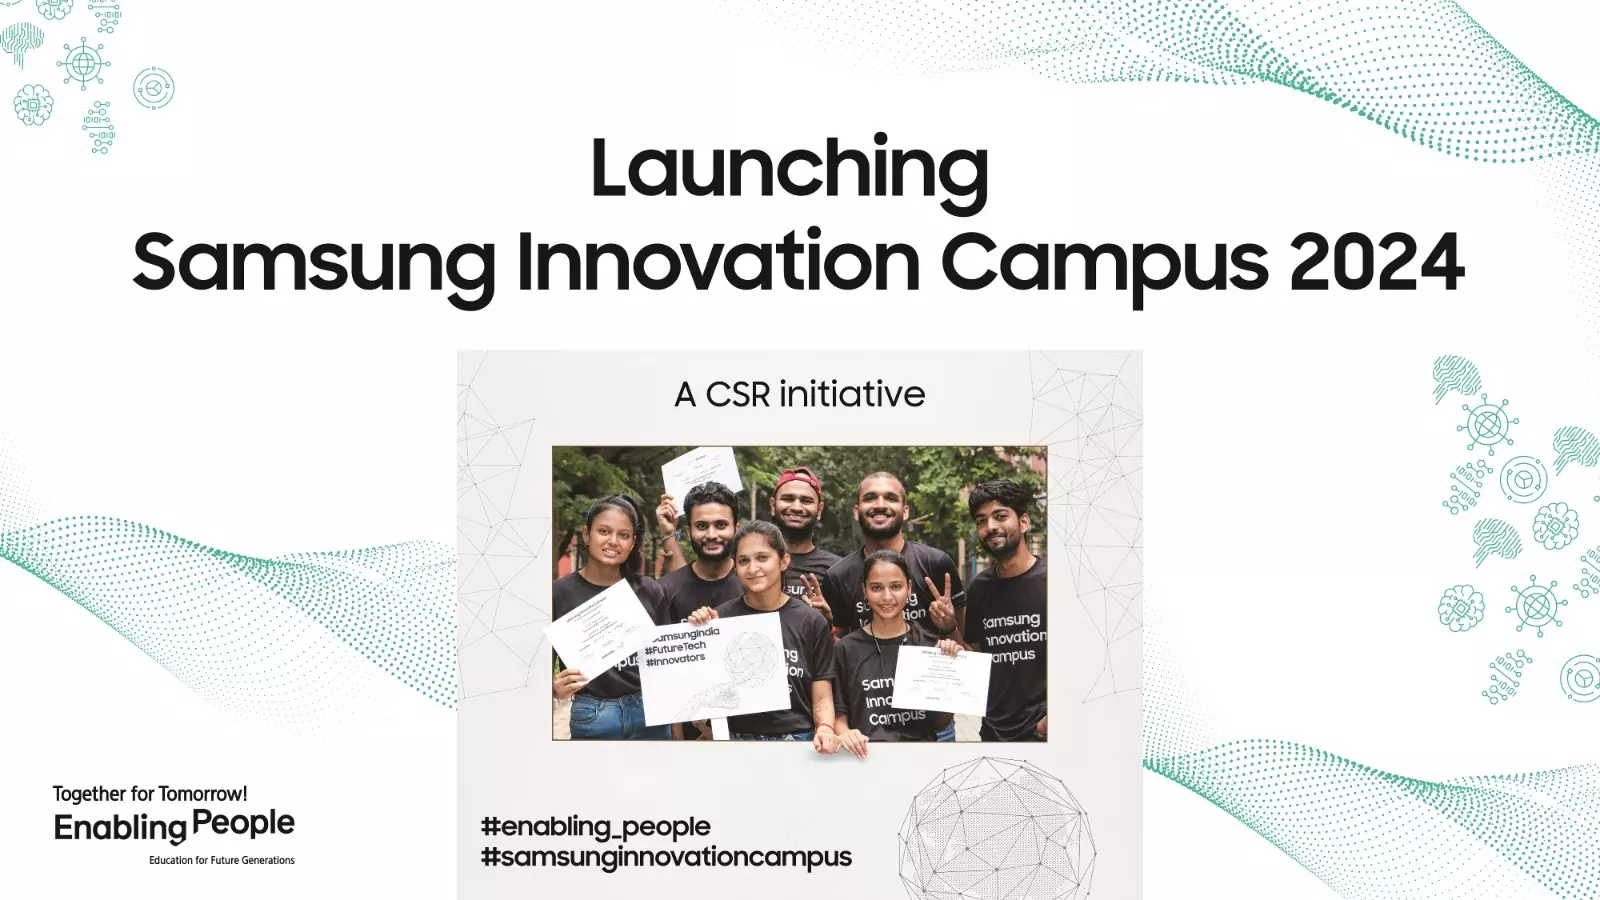 Samsung Innovation Campus to empower youth on future tech domains